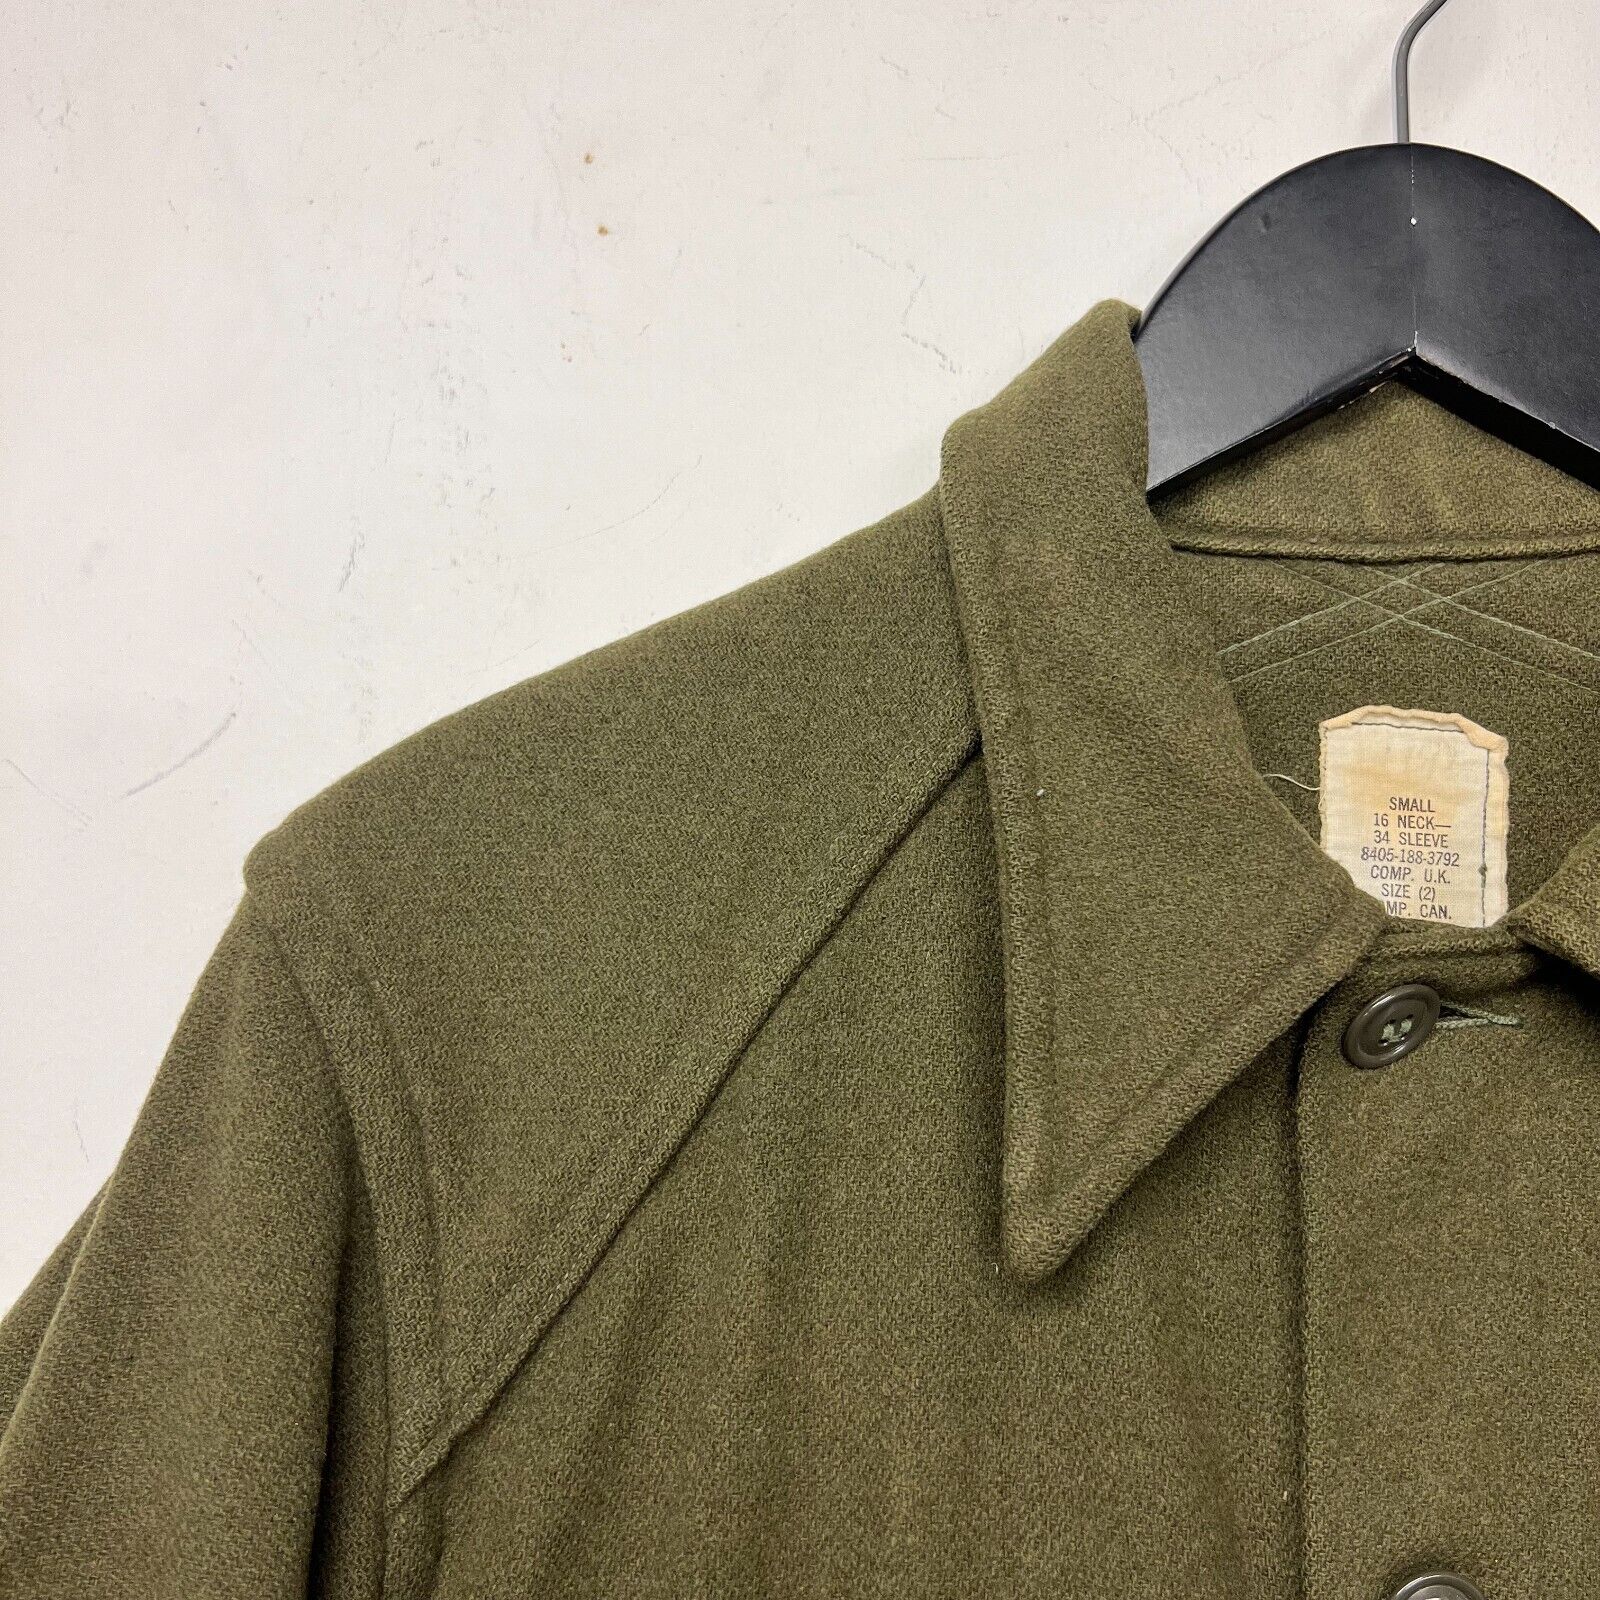 Vintage 80s 90s USA Army Green Button Wool Jacket Size S Military